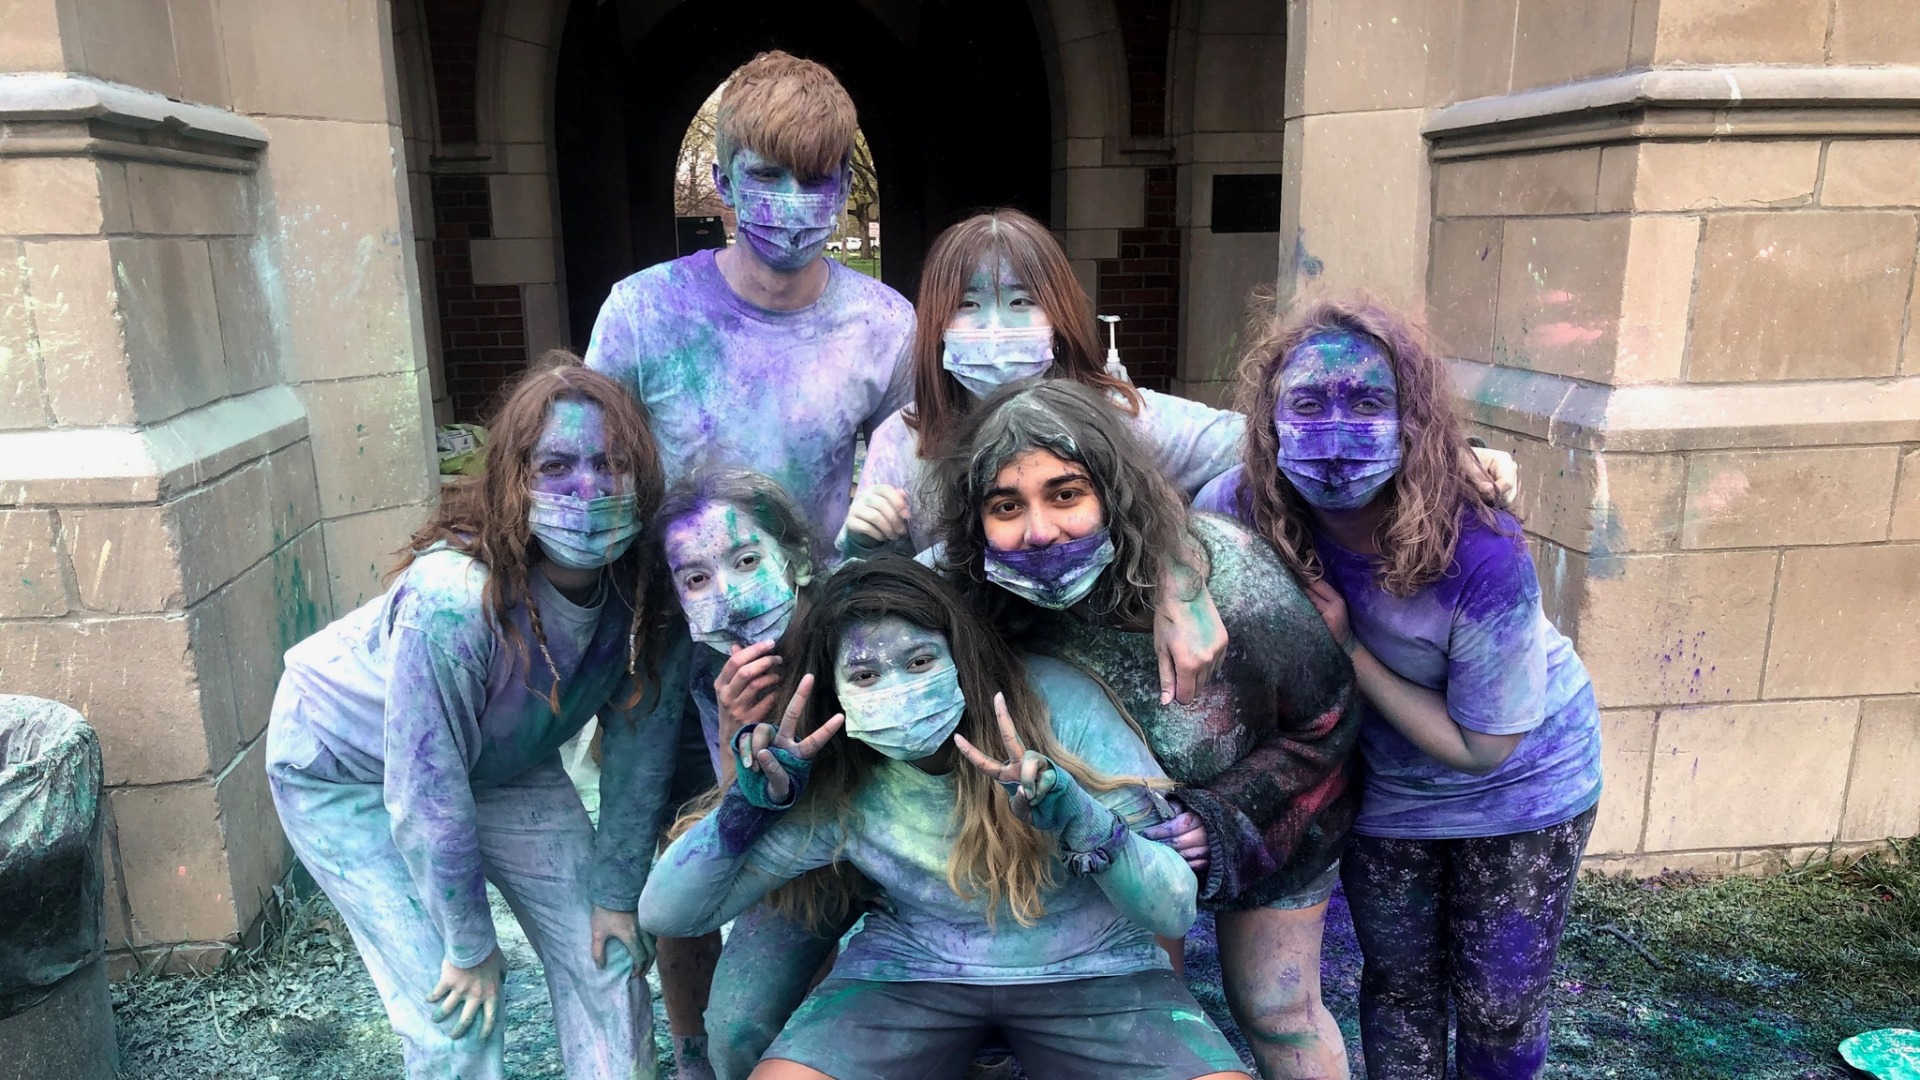 My friends and I drenched in paint head to toe near the arch of a residence hall building!